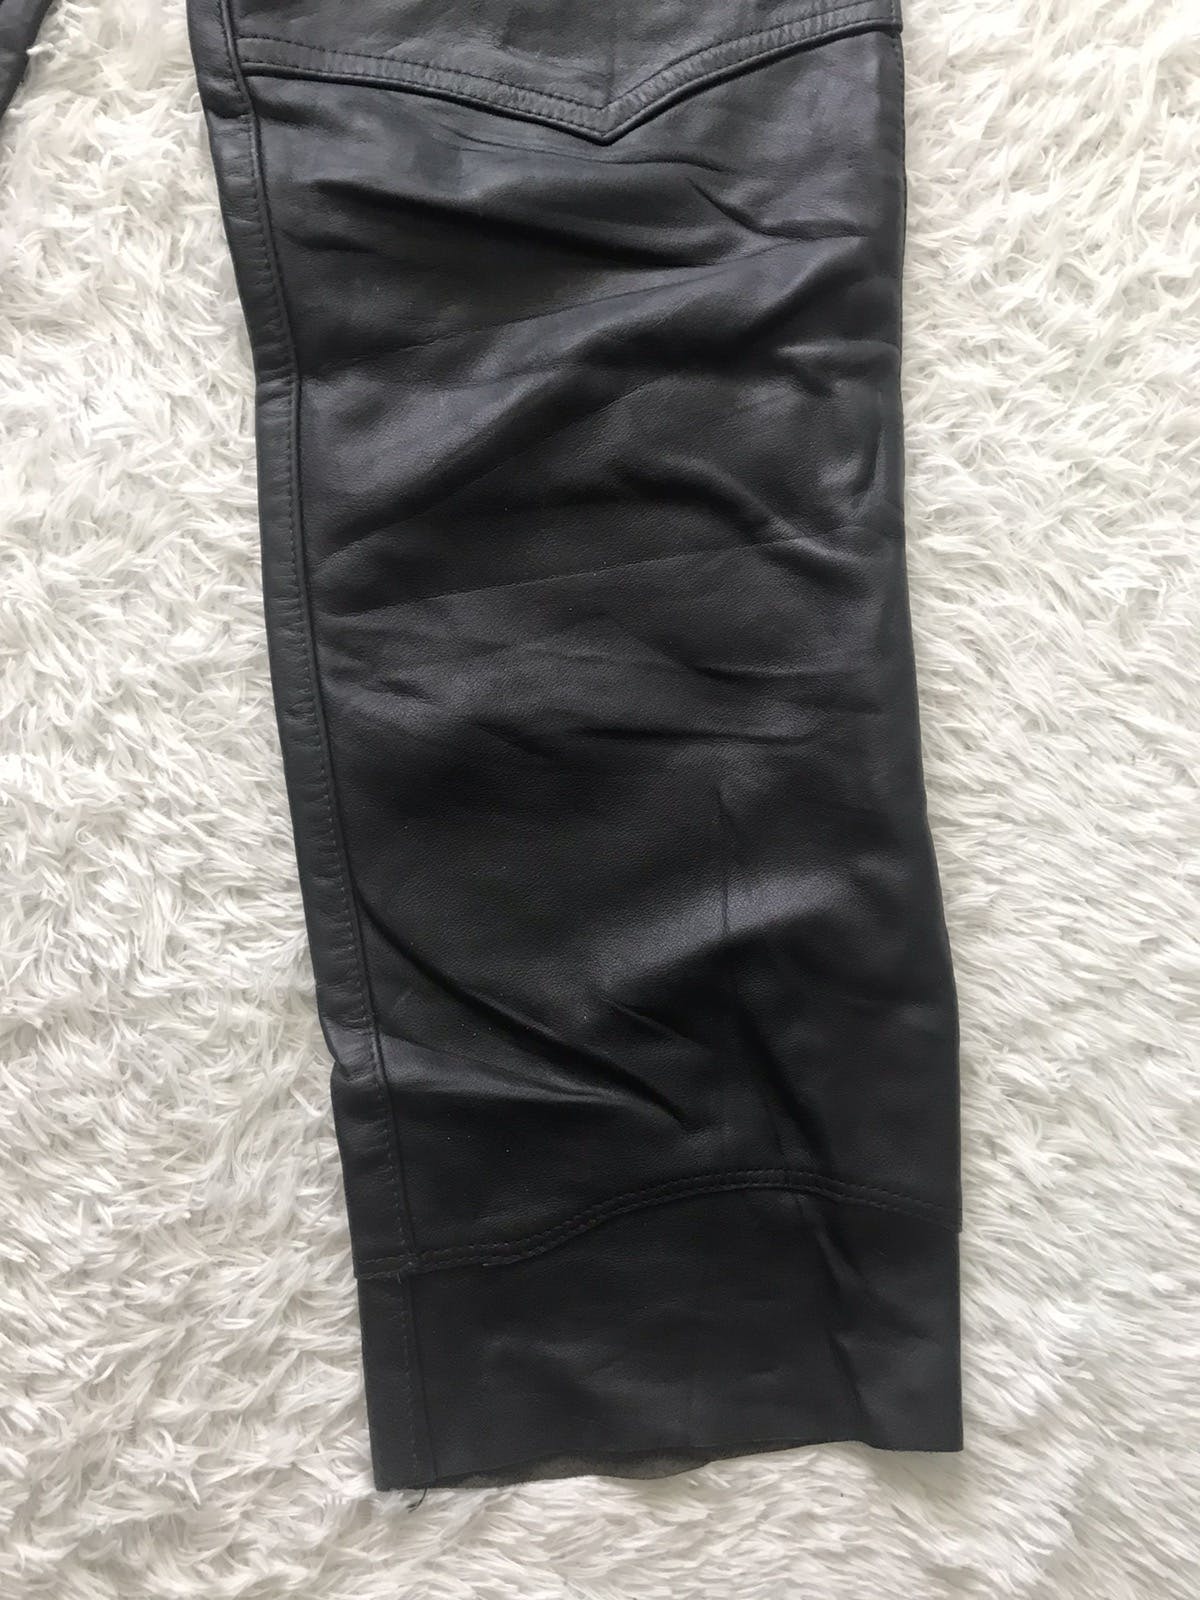 Schott NYC Motorcycle Leather Chaps Pant - 4